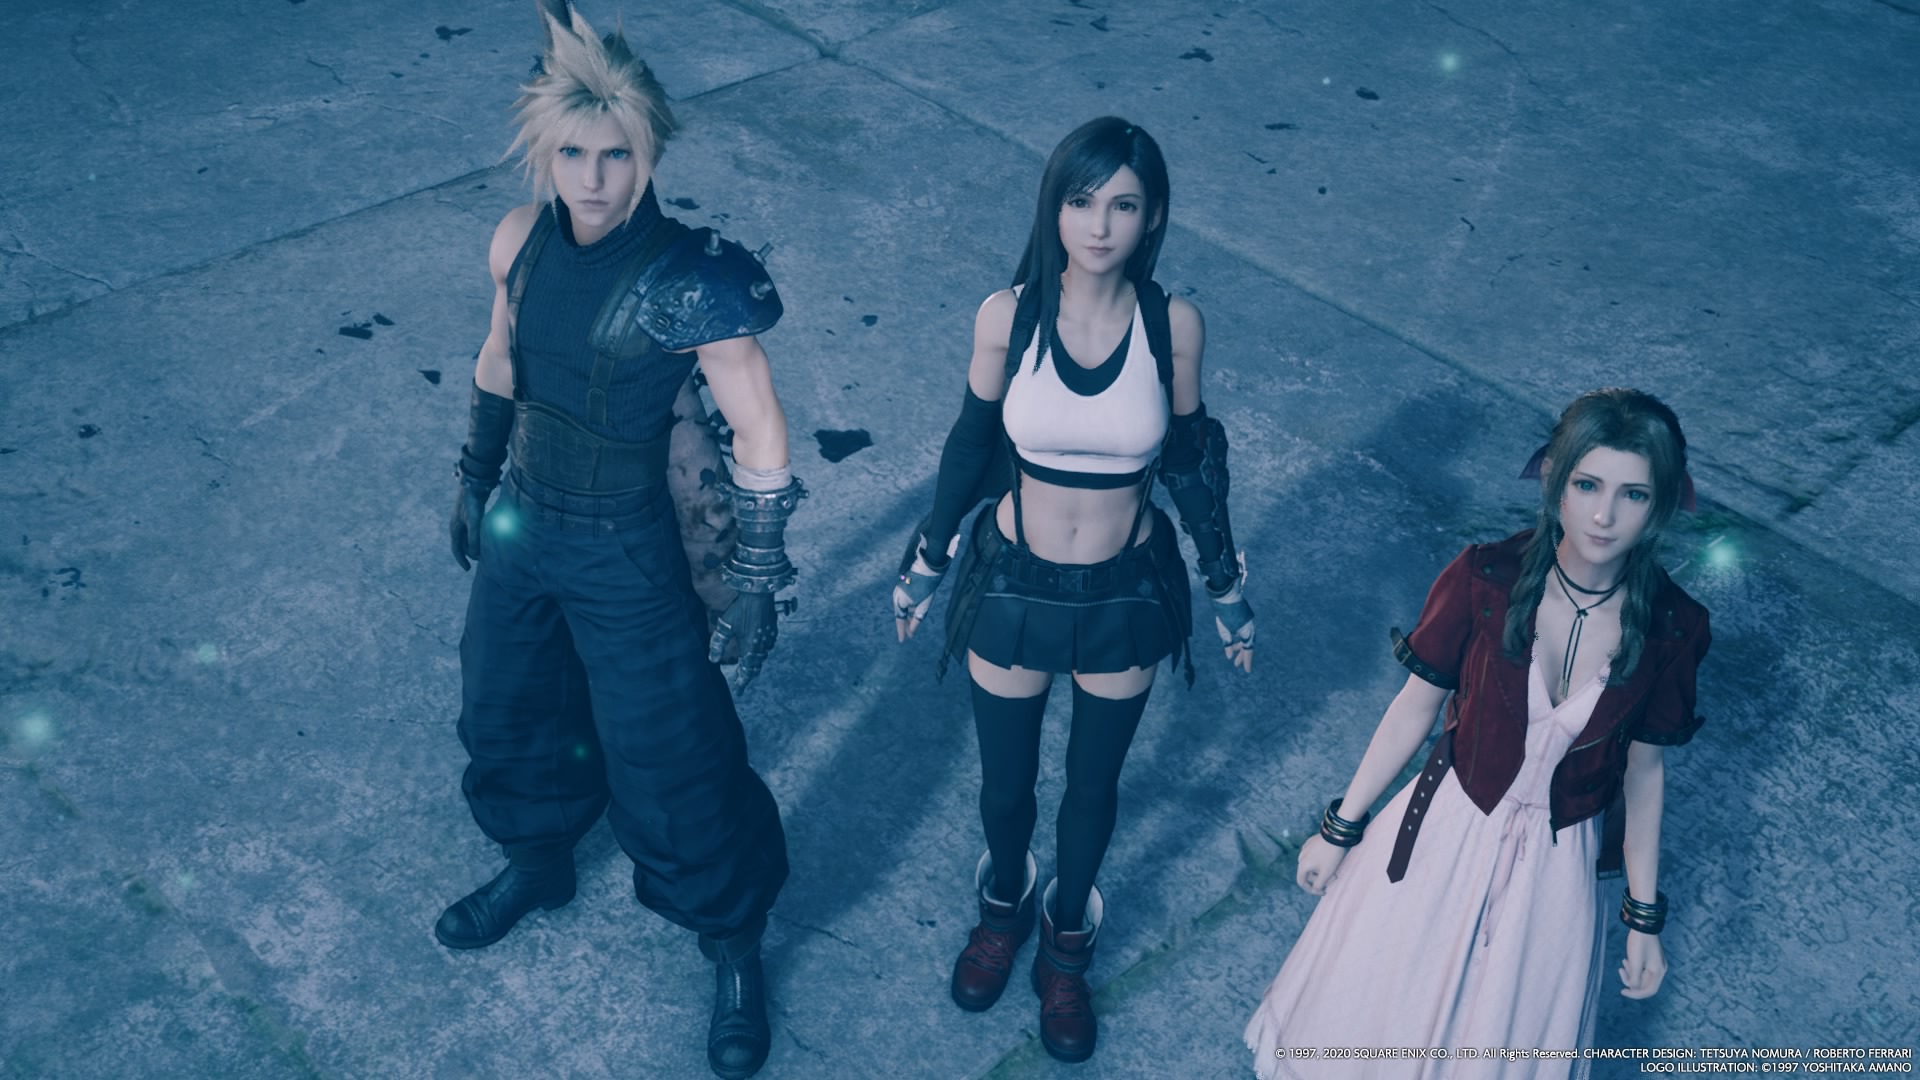 Final Fantasy VII Remake for Xbox One has been listed by a second online  retailer